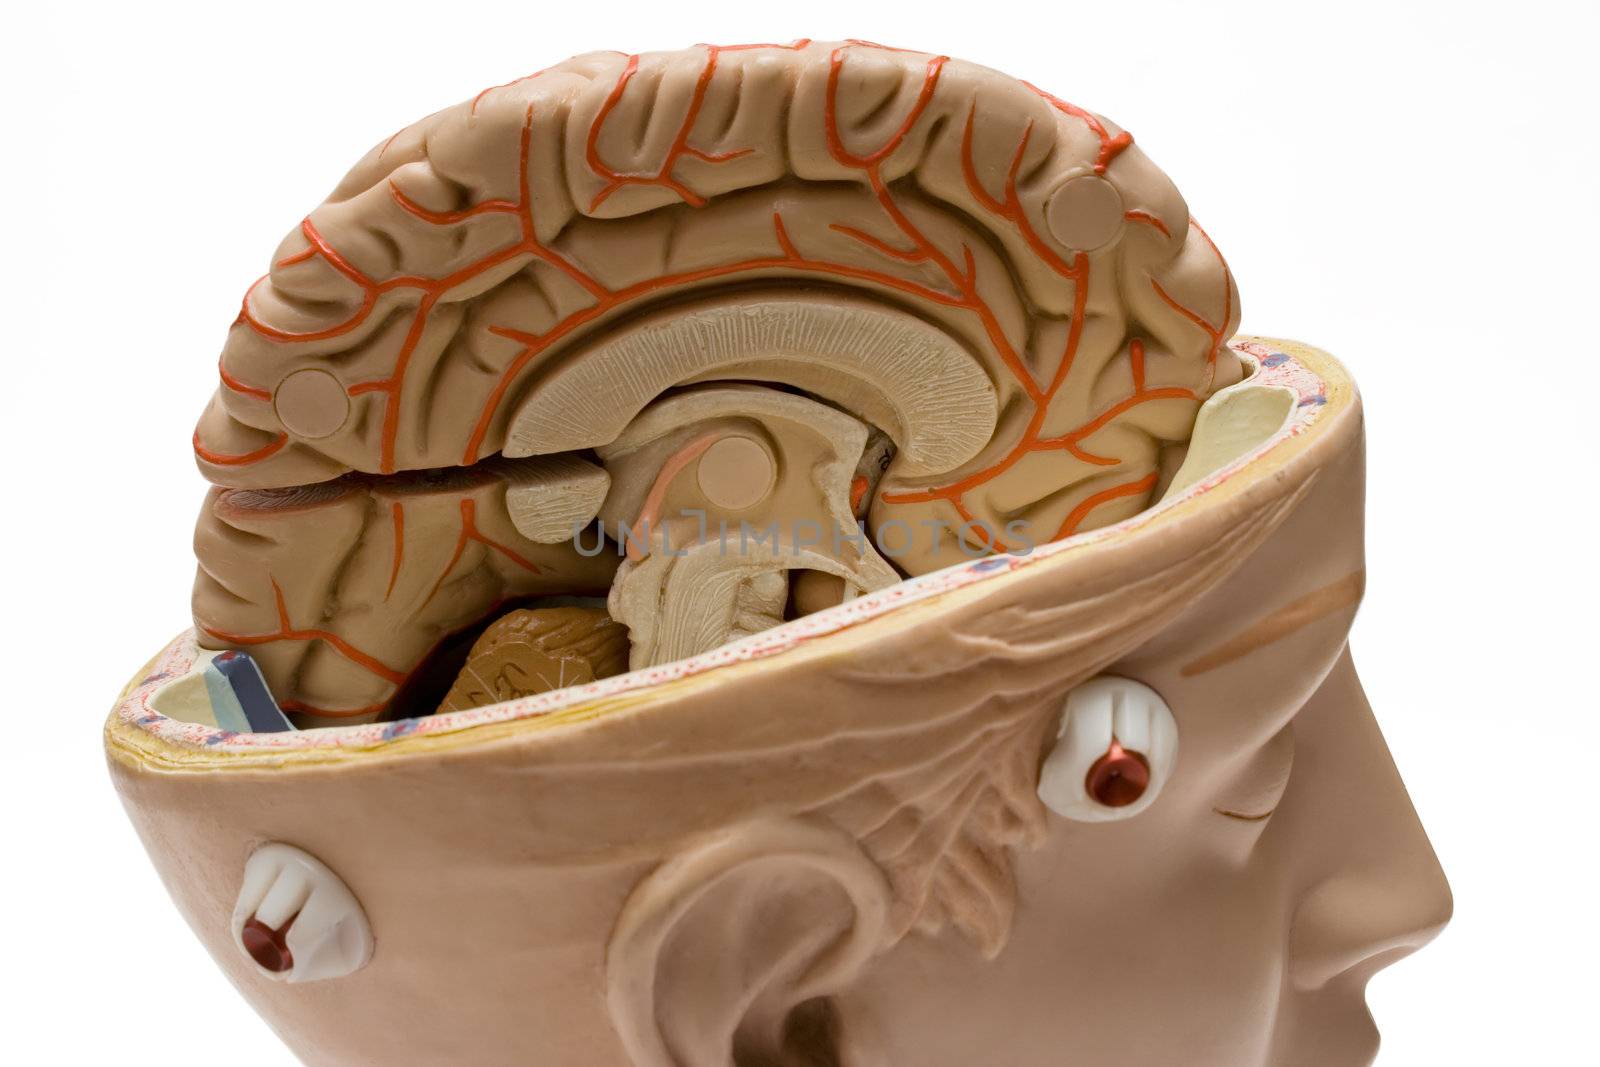 Model of the human brain isolated on a white background.